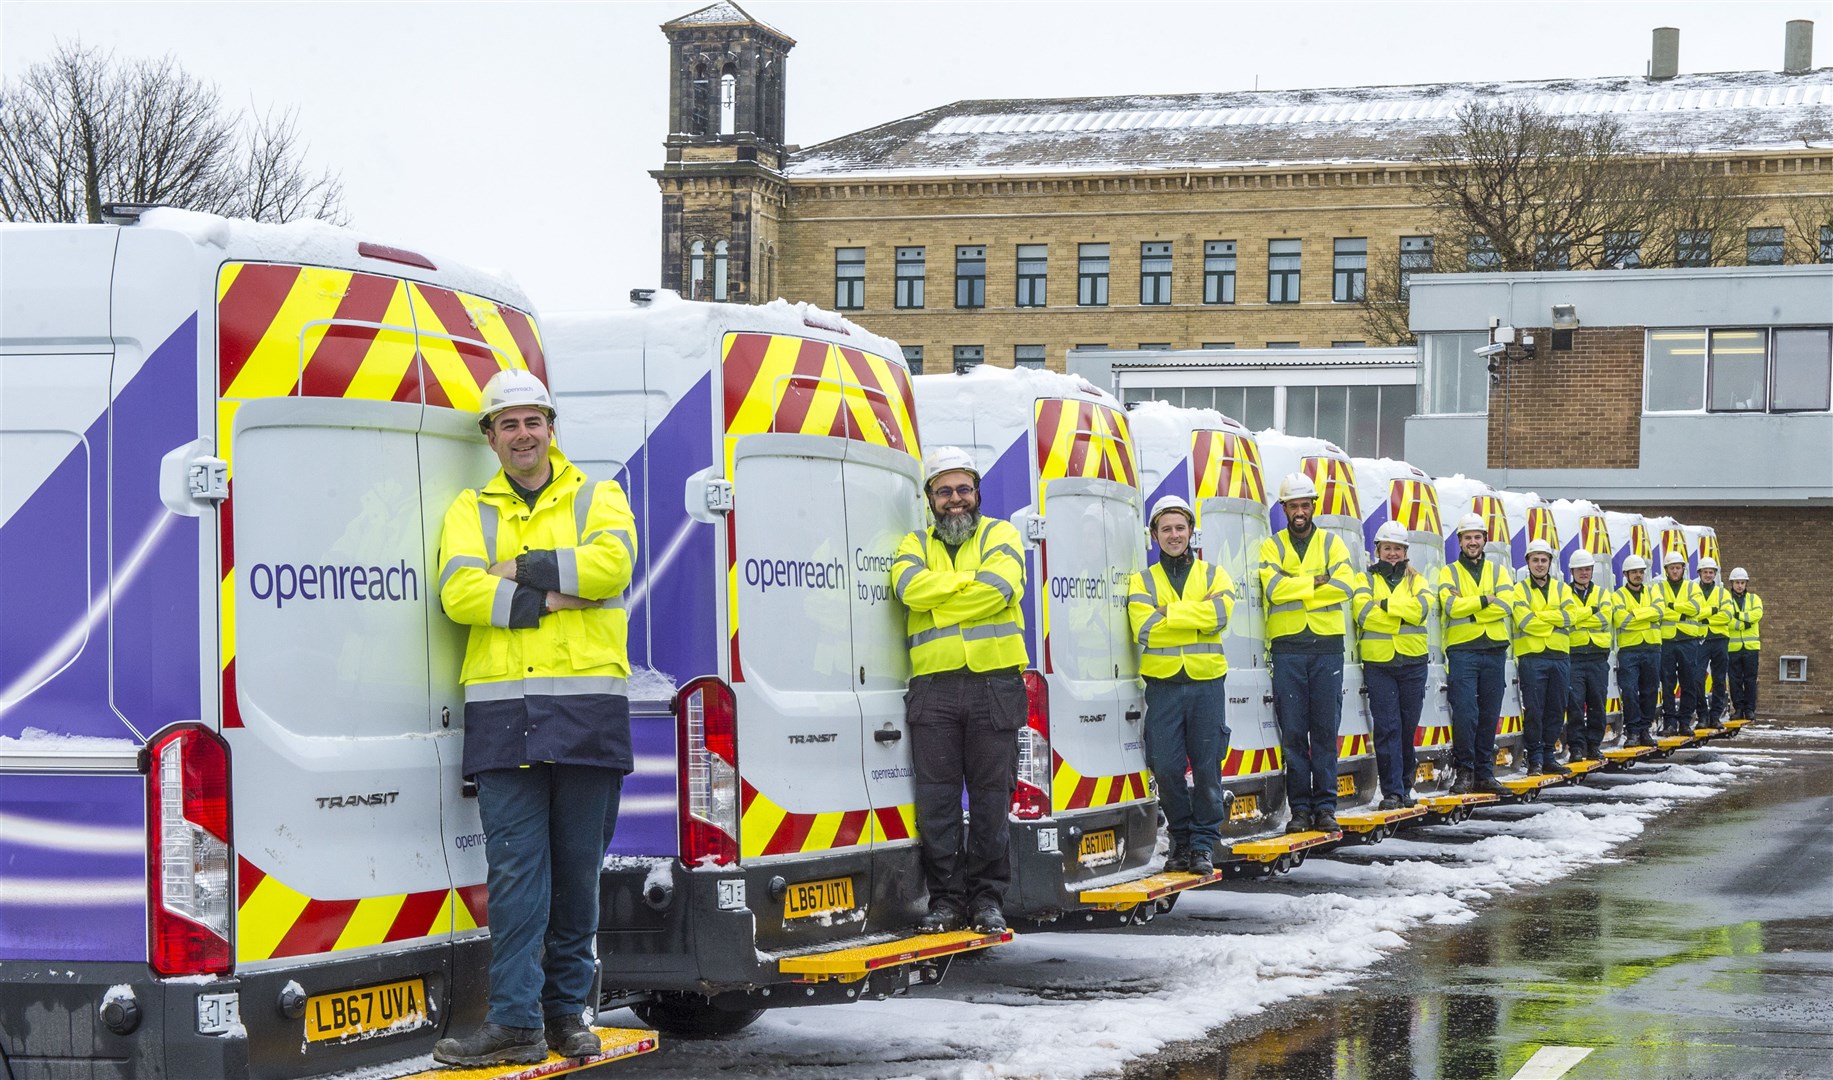 Openreach engineers ready for winter.